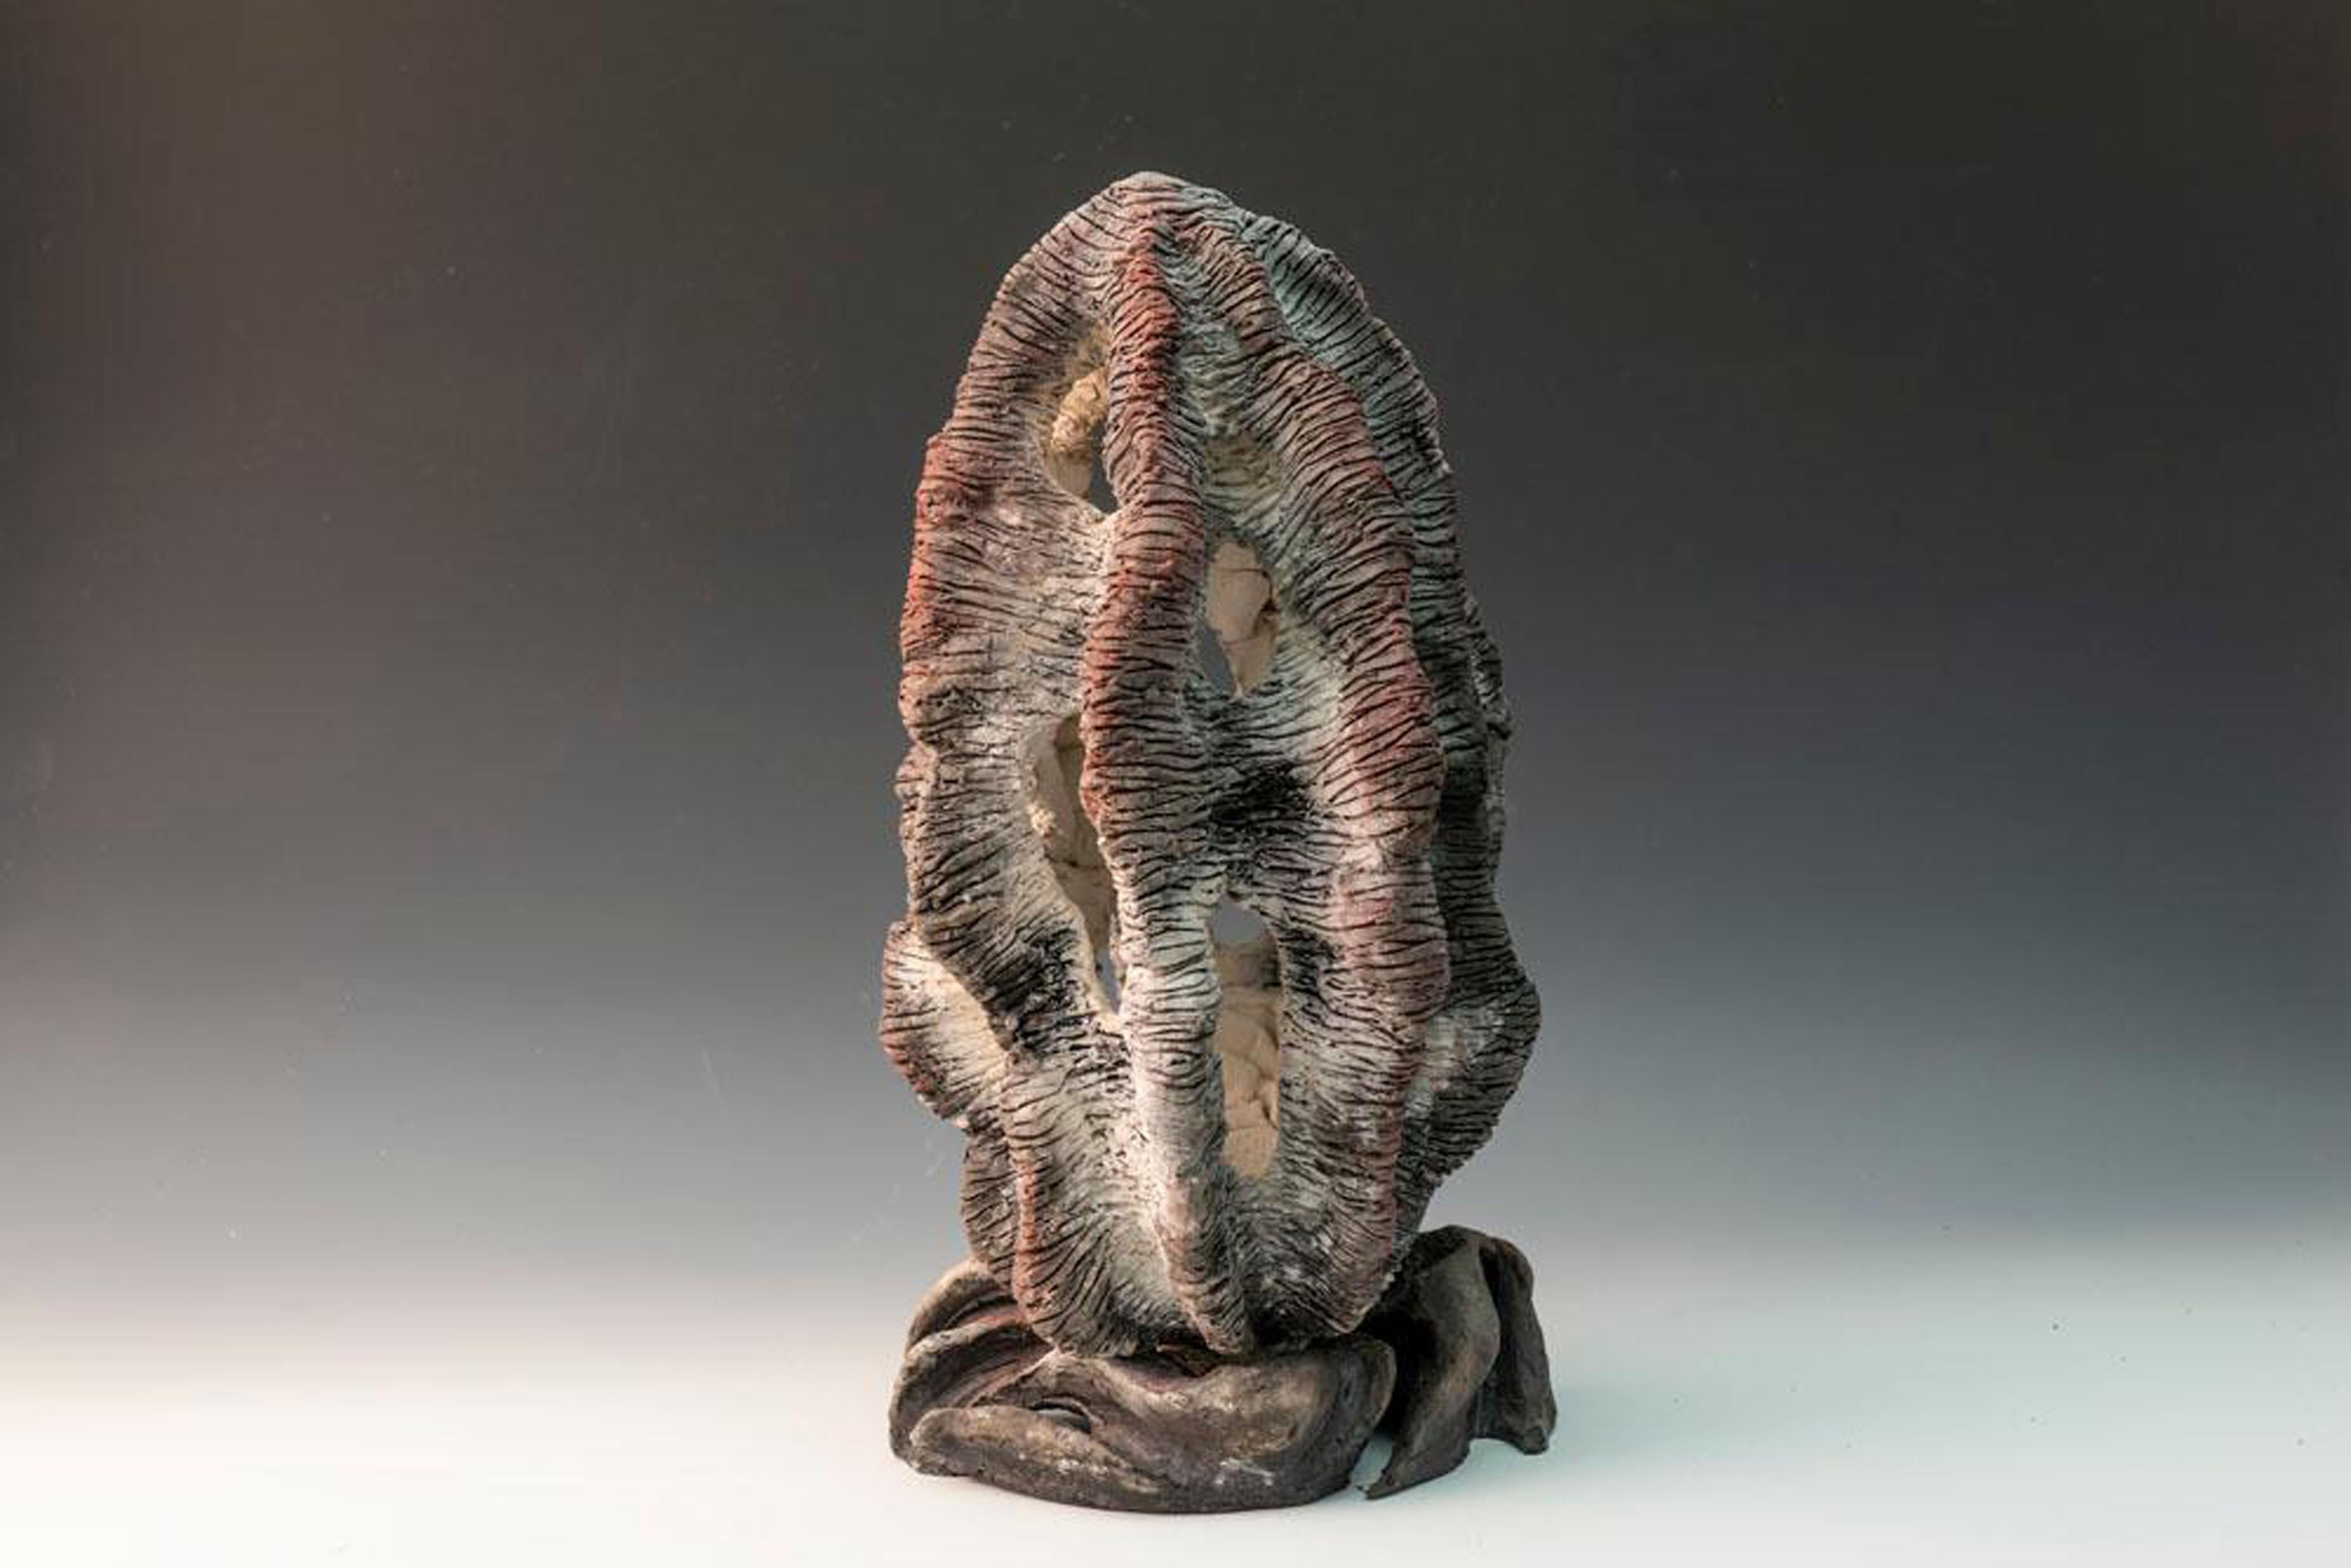 Allan Drossman Abstract Sculpture - "Captured Light", textured ceramic in grays and pinks, embodies essential clay